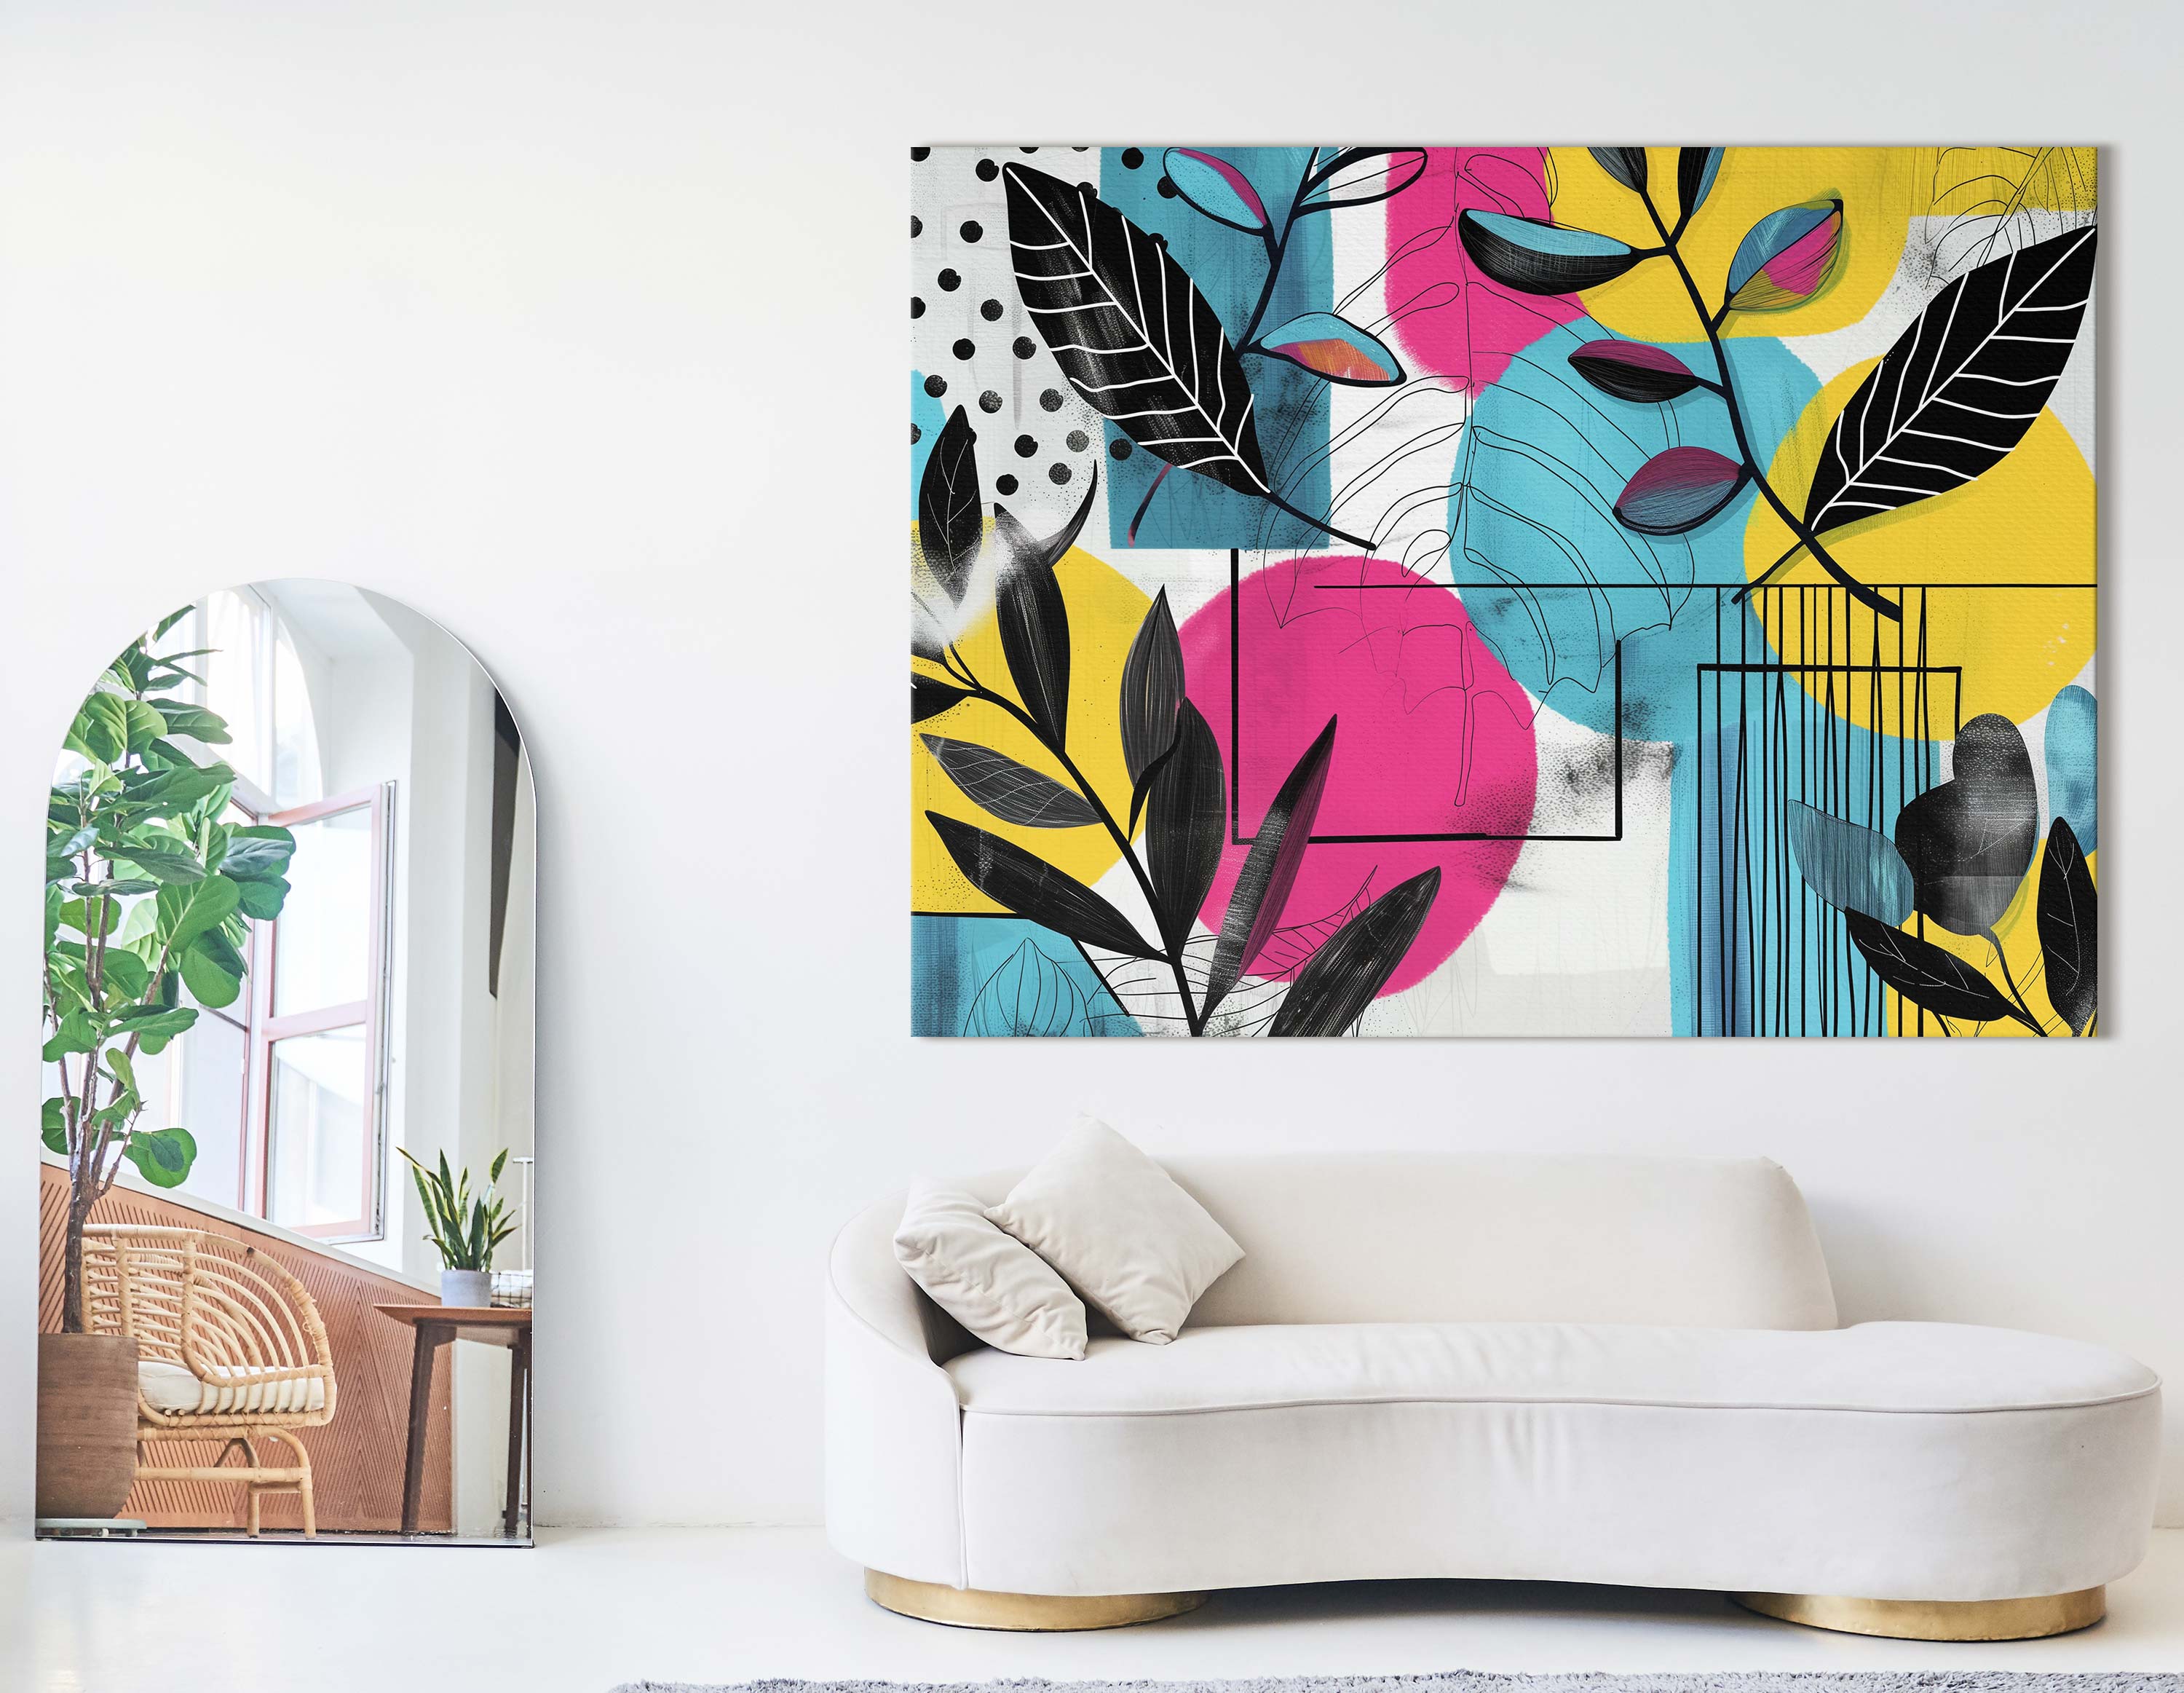 Artistic Pink, Blue, and Yellow Wall Hanging